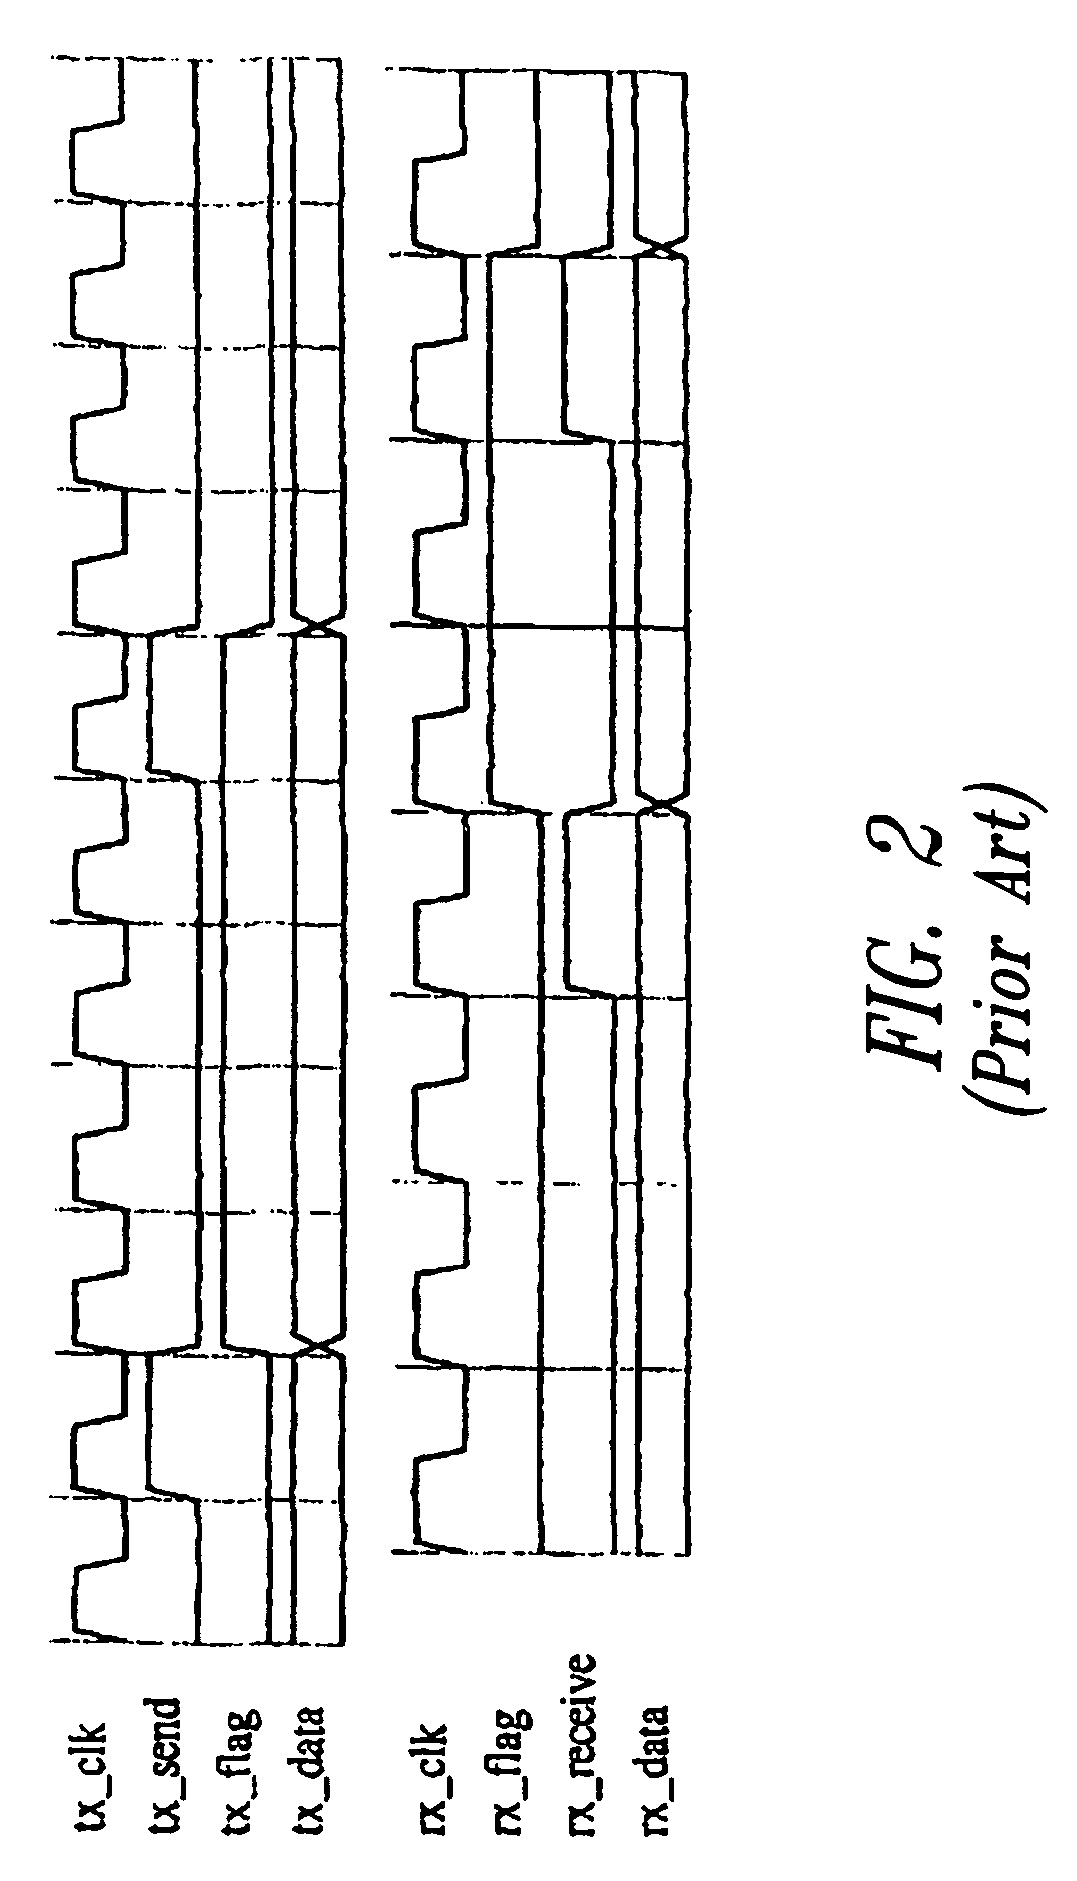 Device for transferring data via write or read pointers between two asynchronous subsystems having a buffer memory and plurality of shadow registers